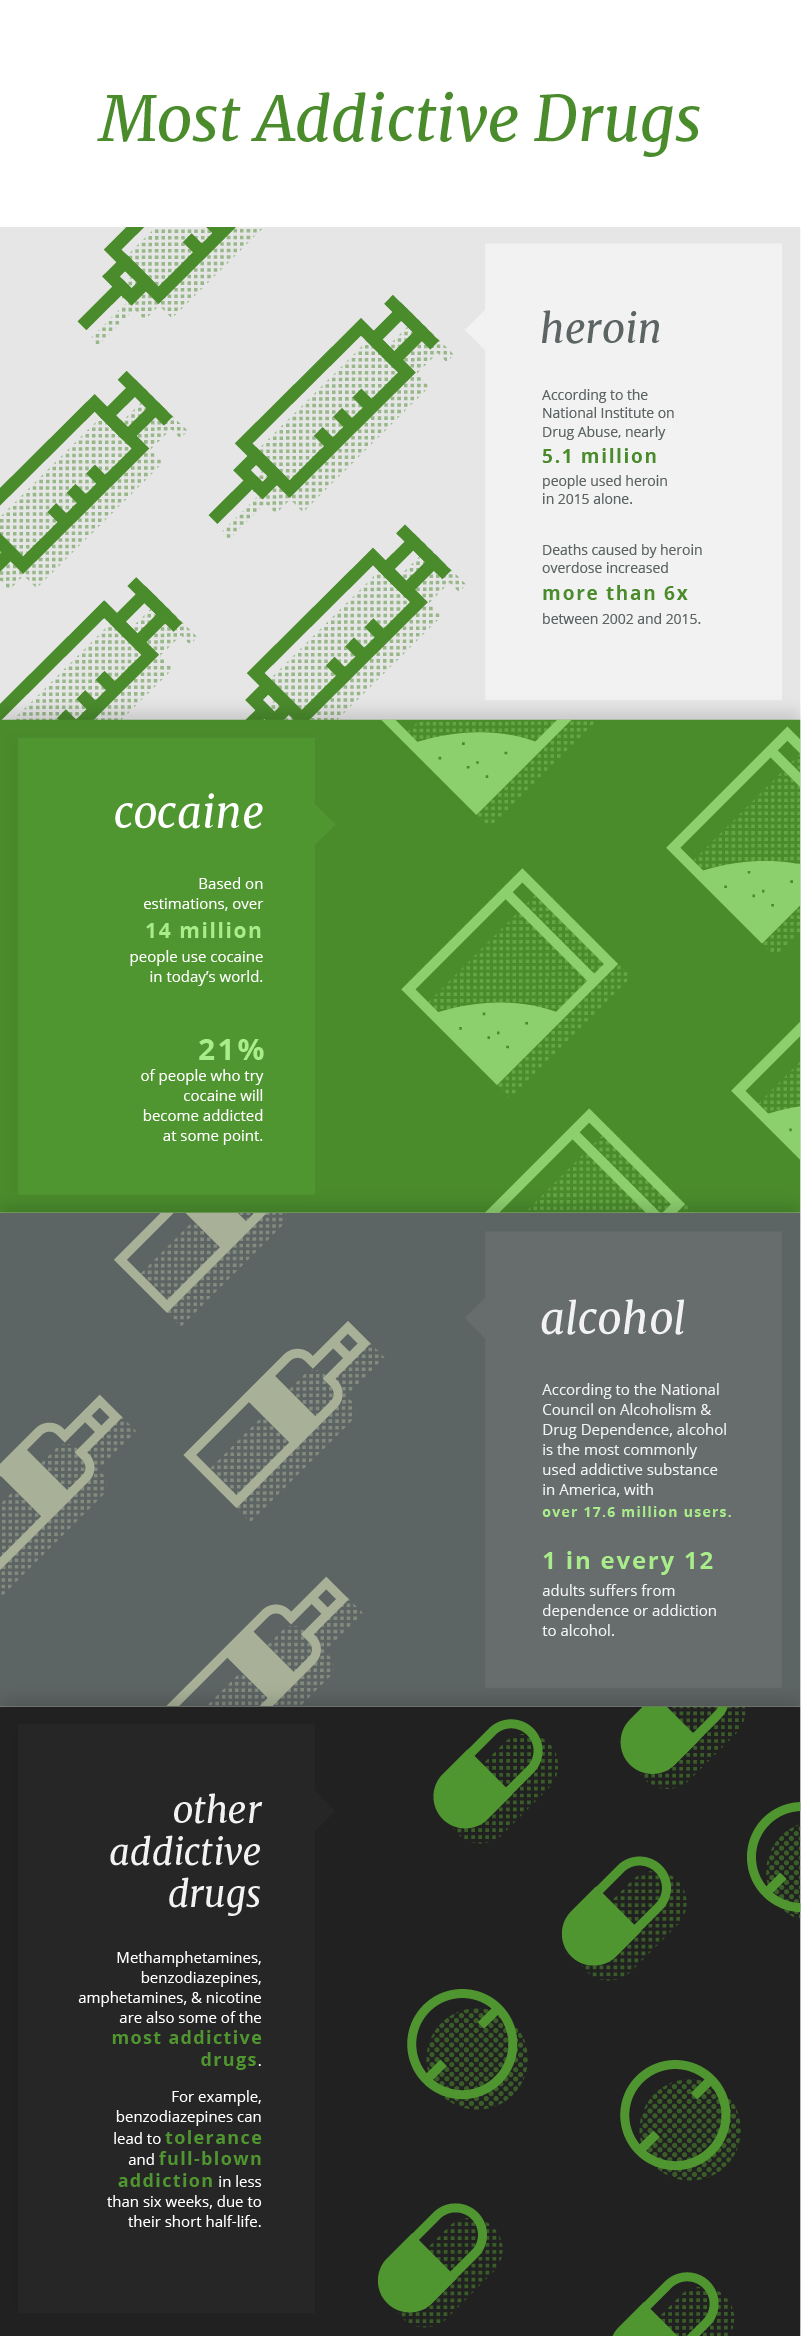 What Are the Most Addictive Drugs in the World?